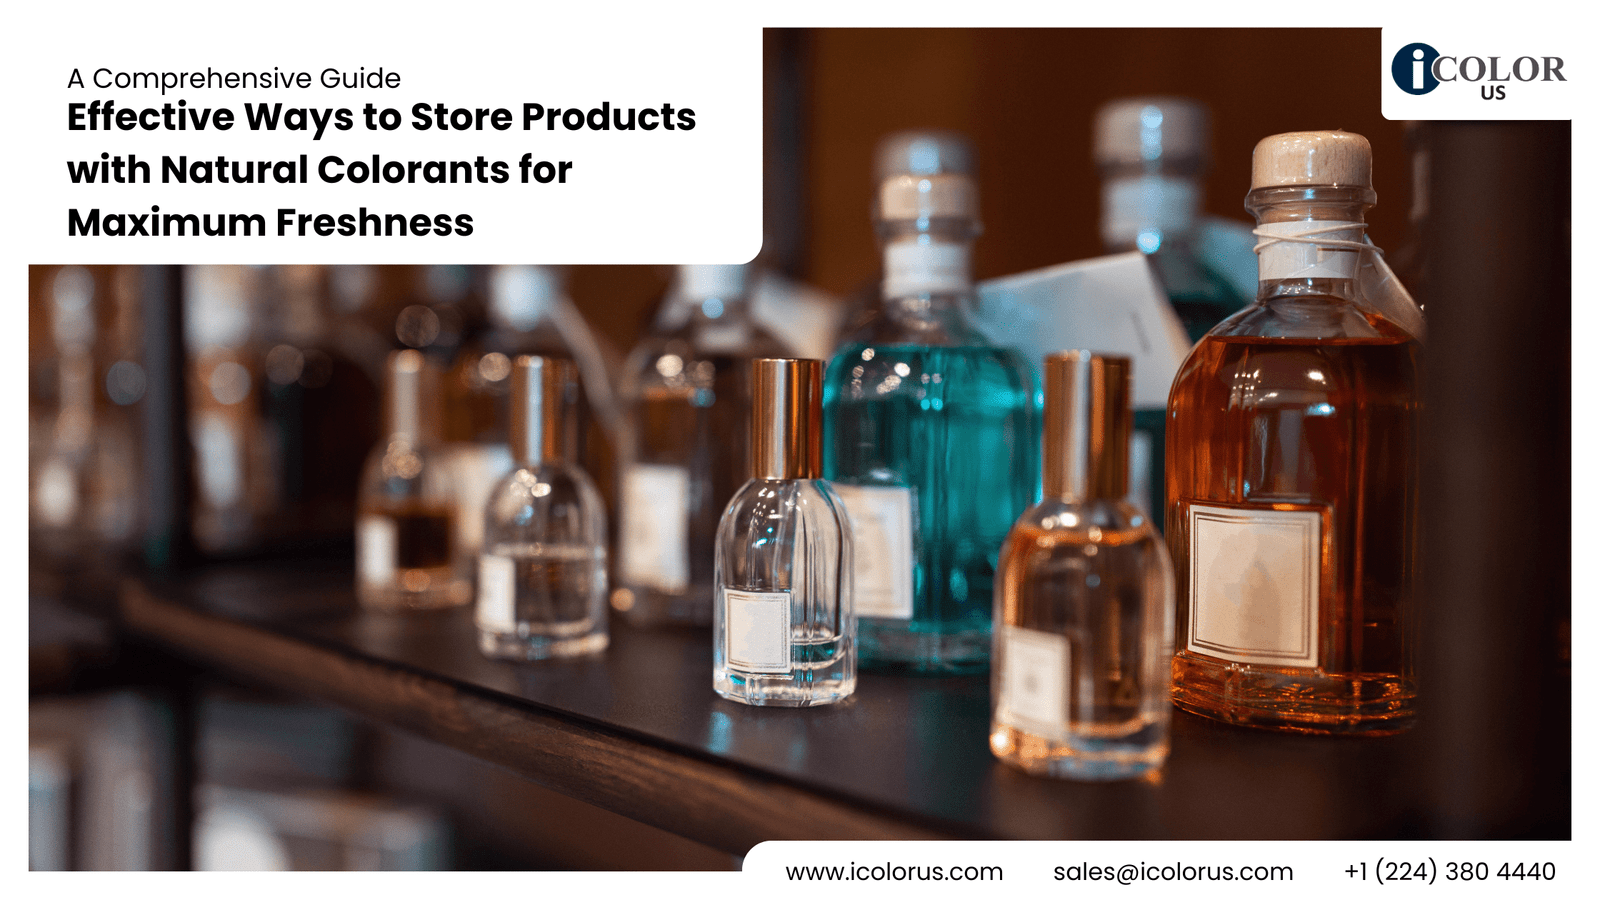 Store Products with Natural Colorants